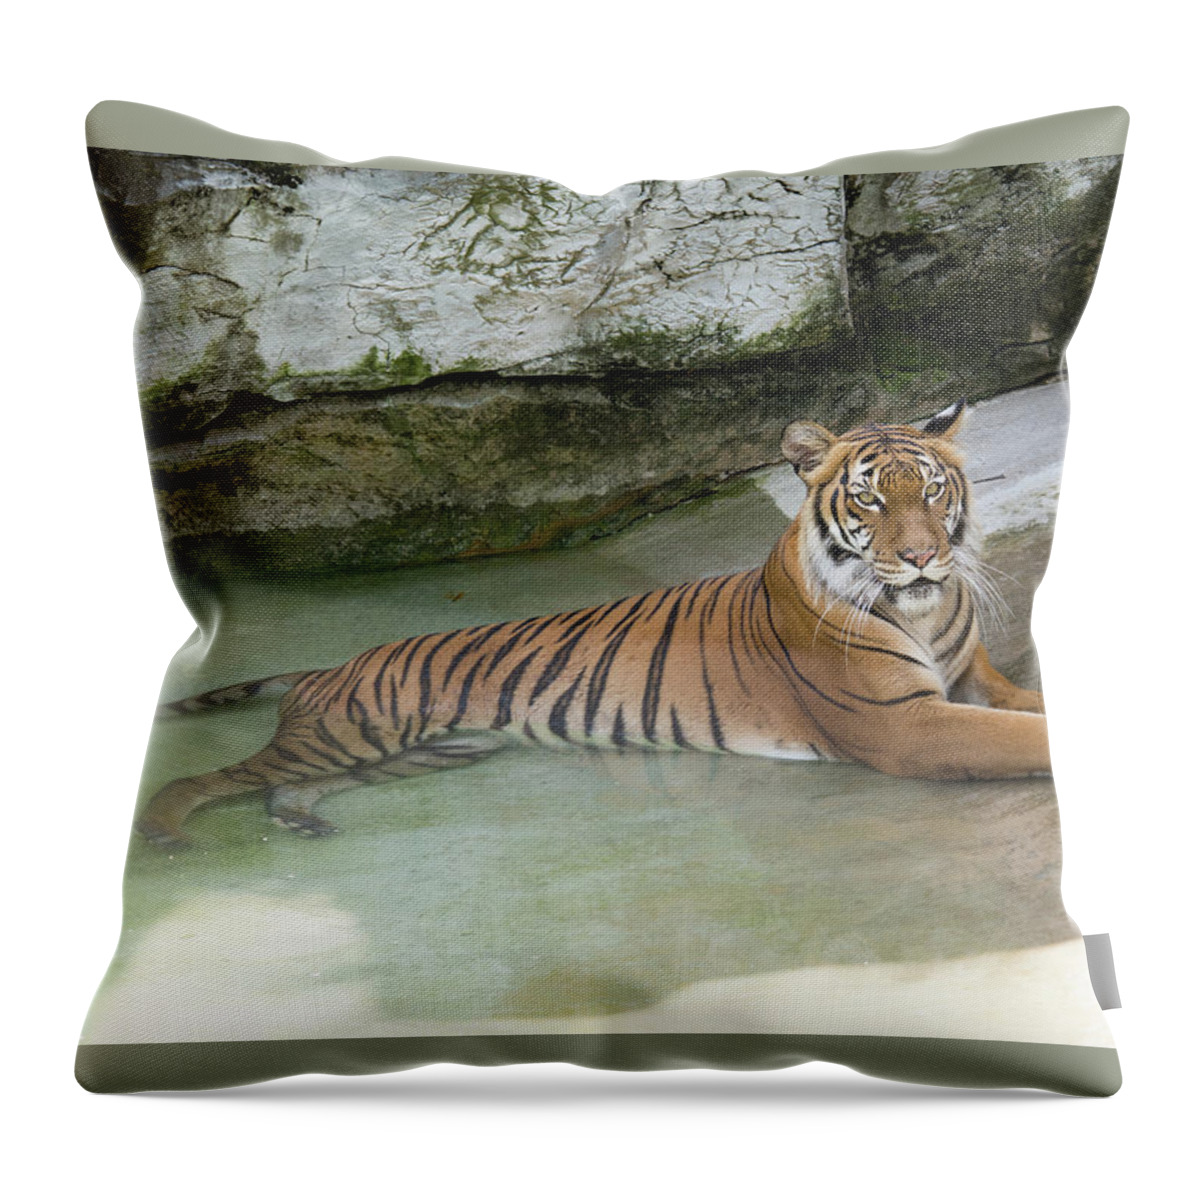 Tiger Throw Pillow featuring the photograph Tiger #1 by John Black